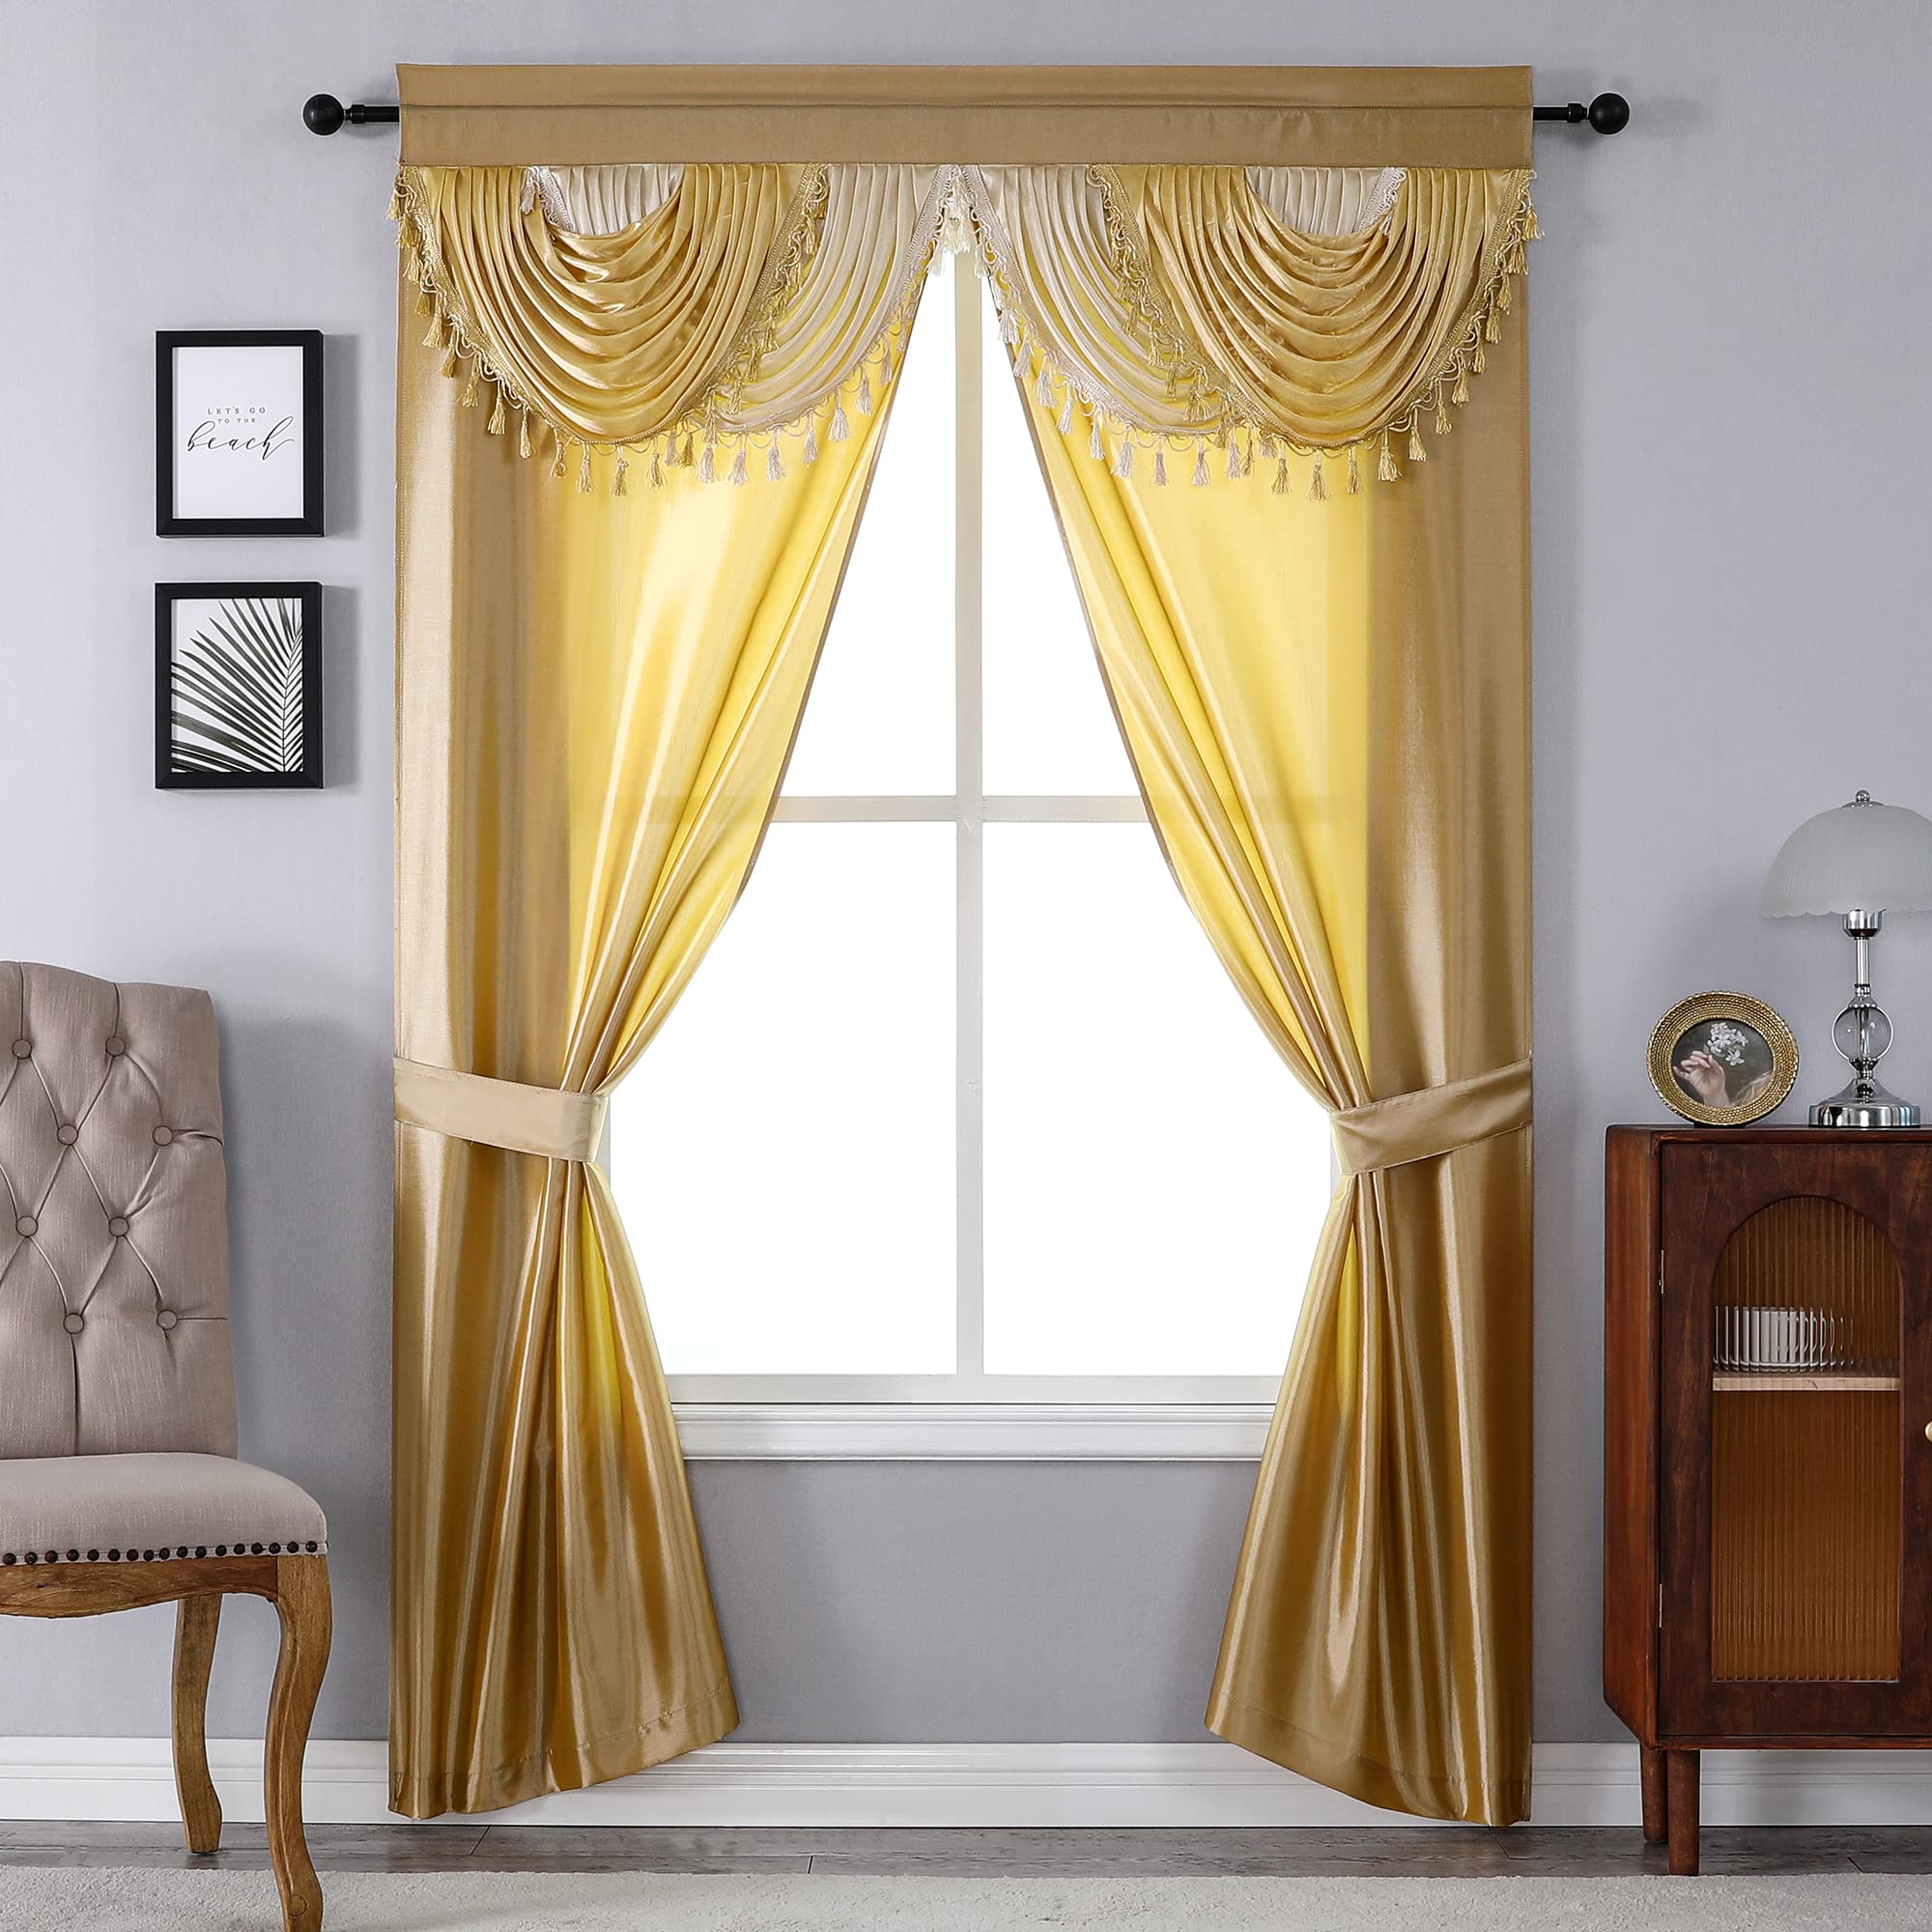 Book Cover Regal Home Collections Amore Curtains 5-Piece Window Curtain Set - 54-Inch W x 84-Inch L Panels with Attached Valance and 2 Tiebacks - Bedroom Curtains and Living Room Curtains (Gold) 54